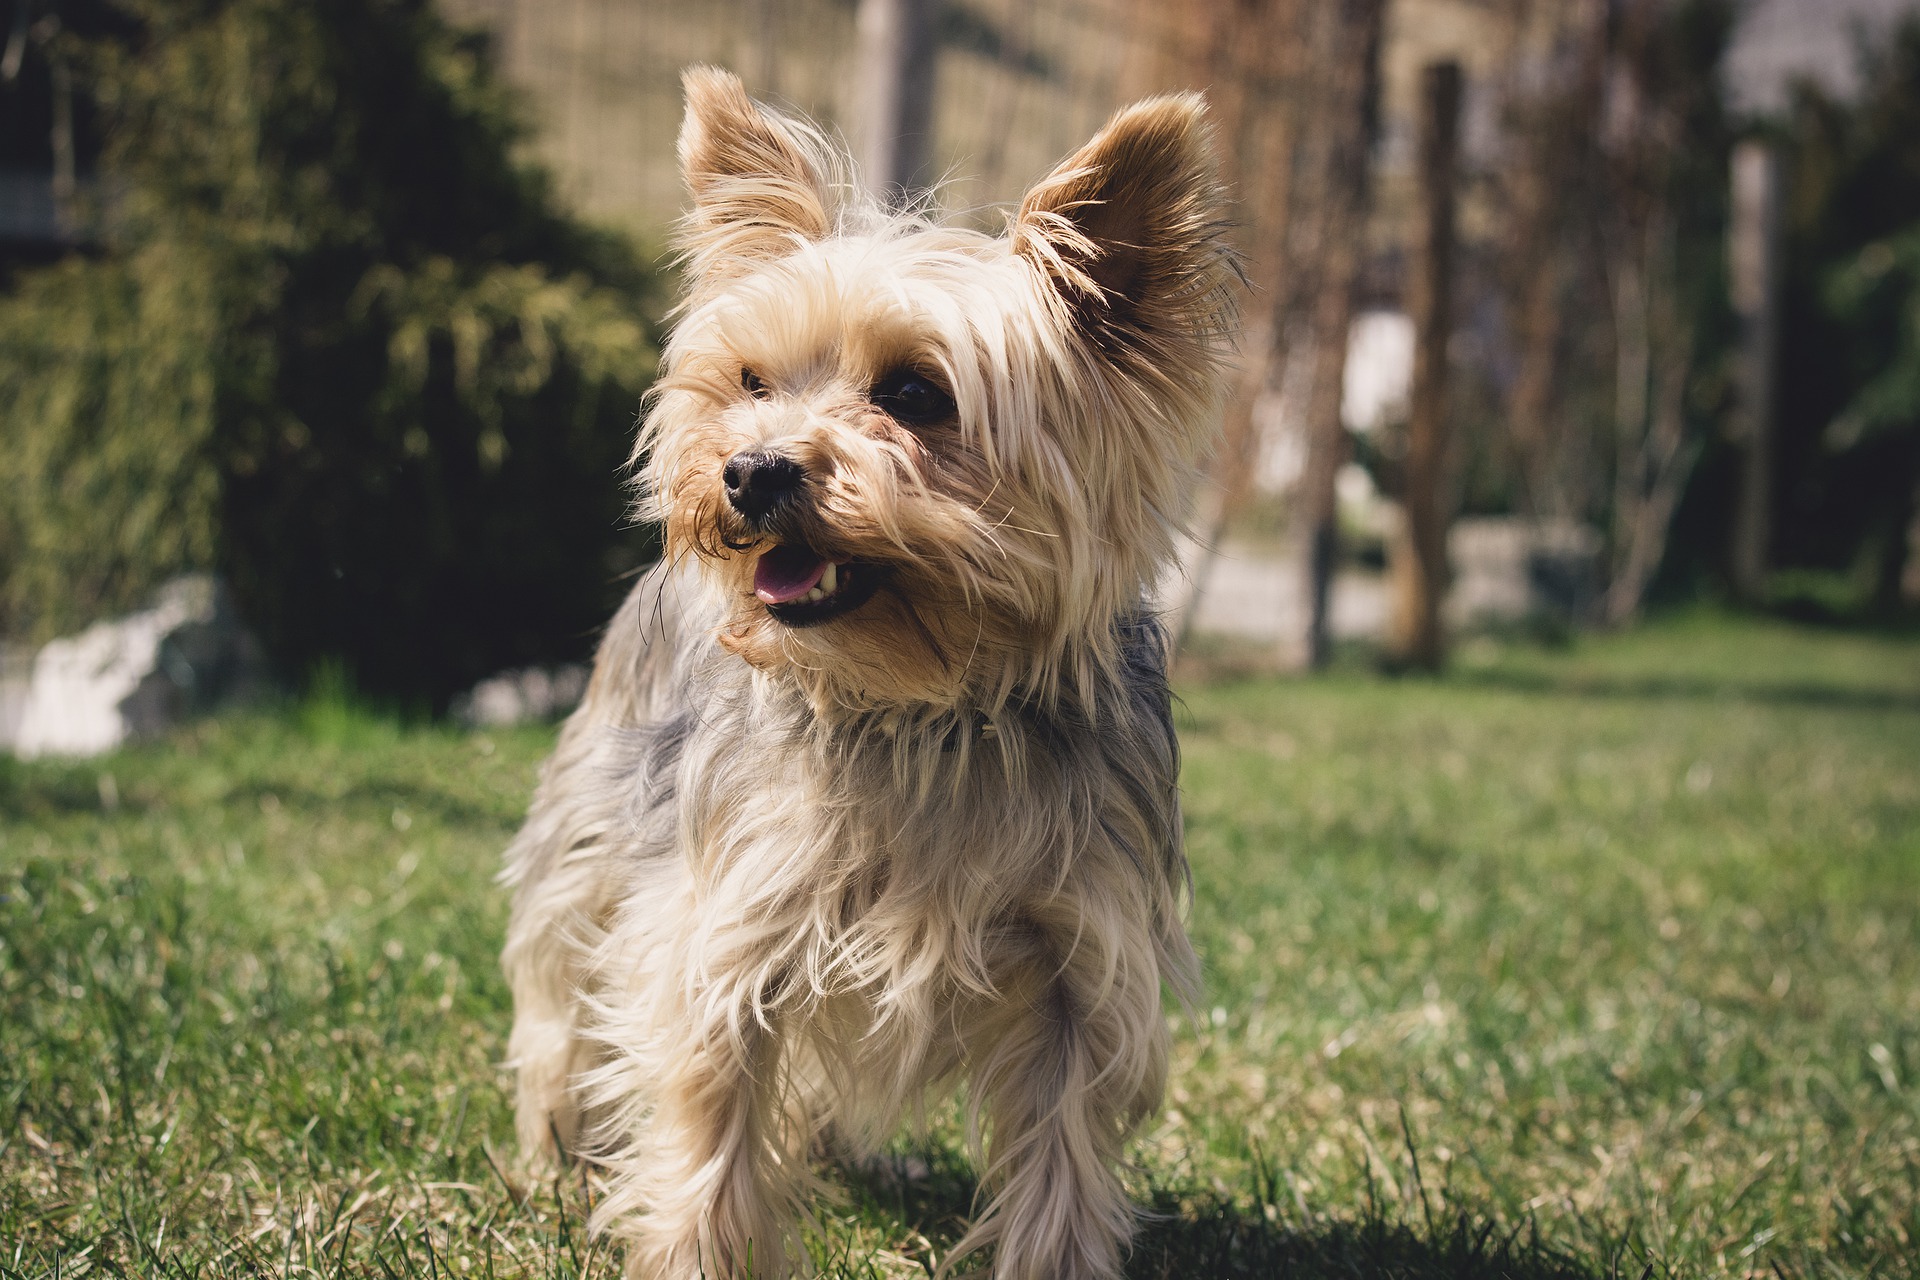 Oliver, a 9 year old Yorkie